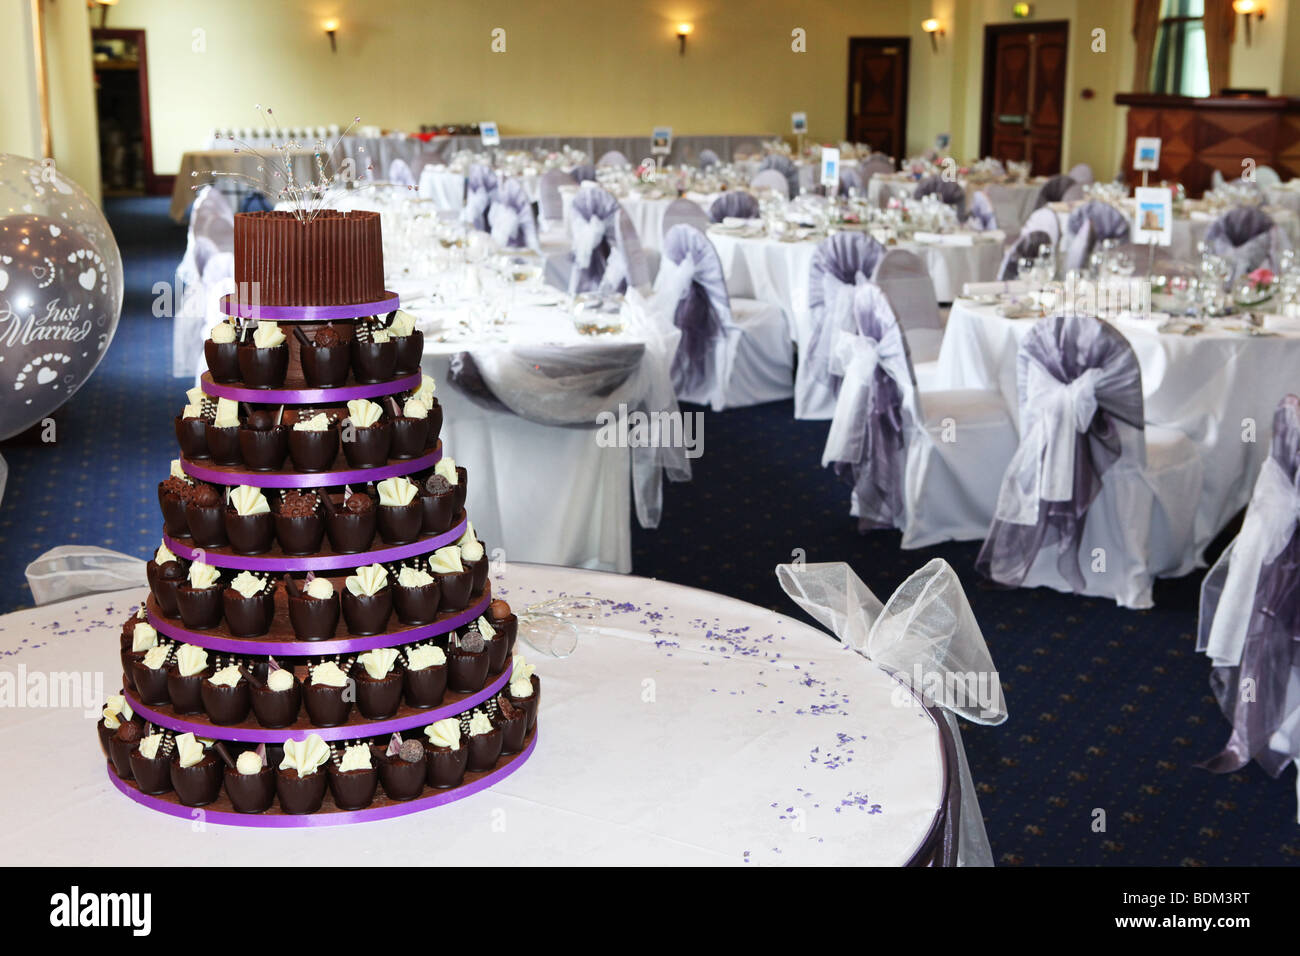 Modern wedding cake with individual chocolate cup cakes standing in wedding breakfast reception room on wedding day Stock Photo